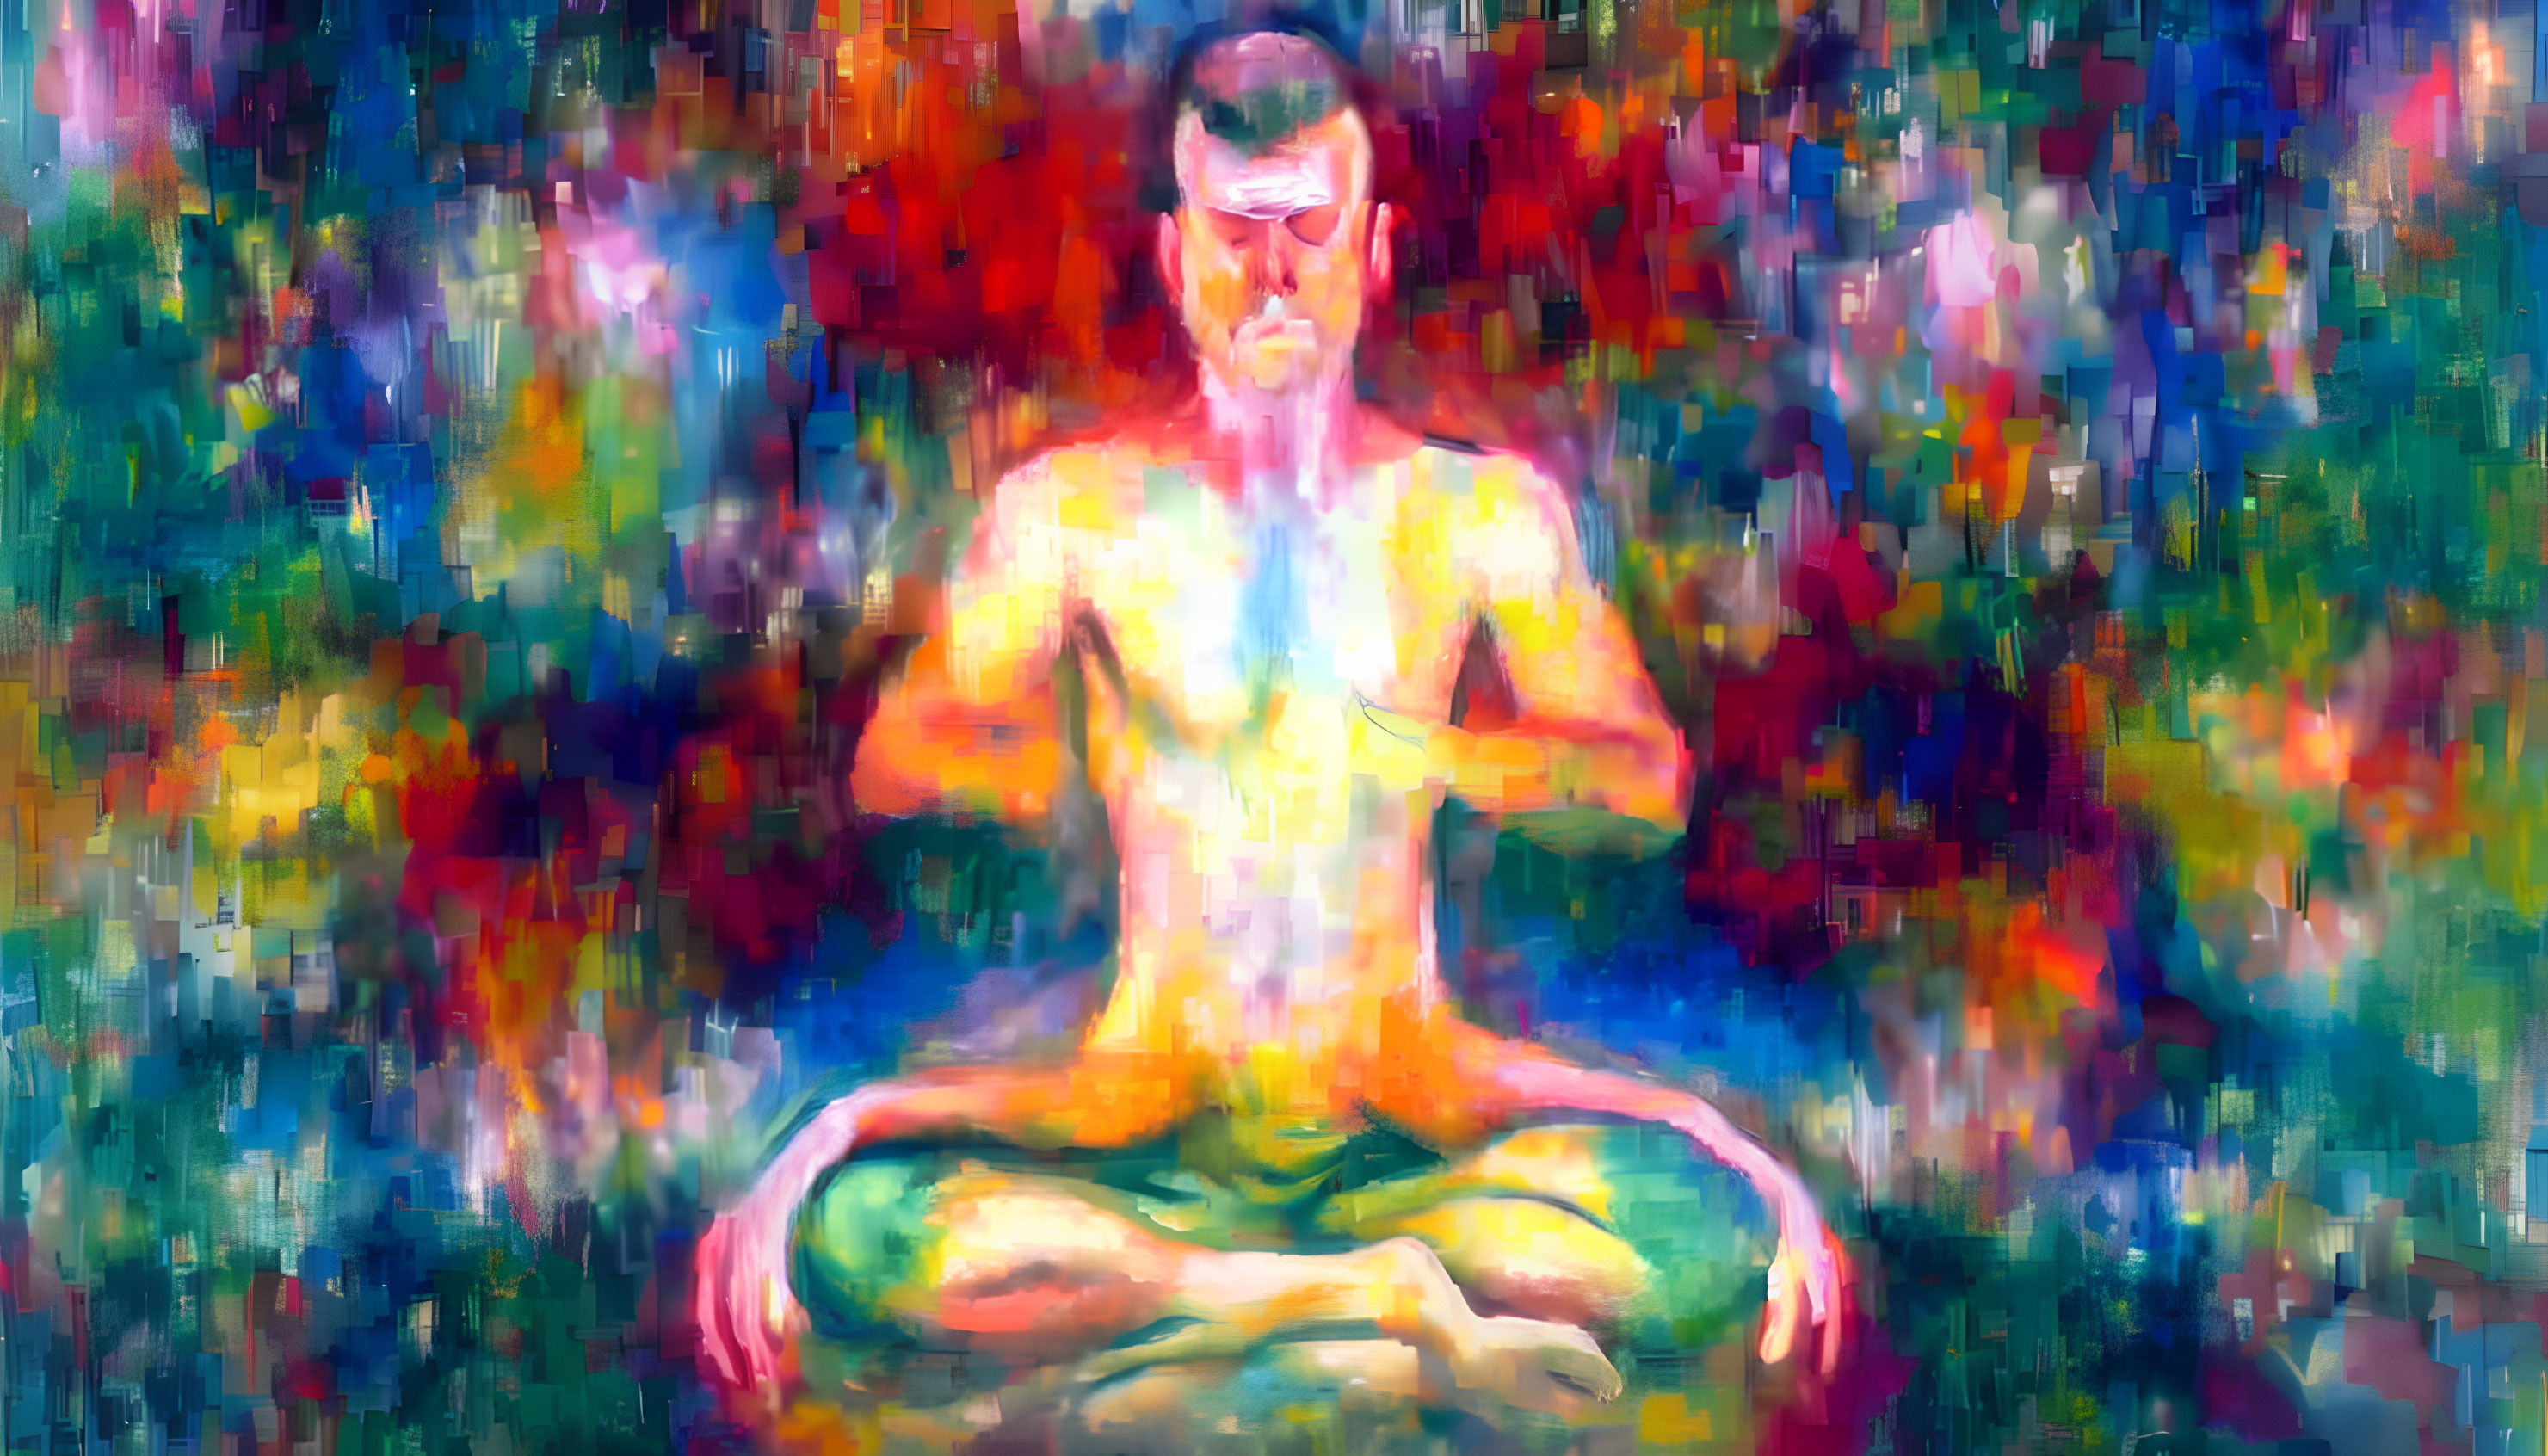 Colorful Abstract Painting of Meditating Person with Energy Aura